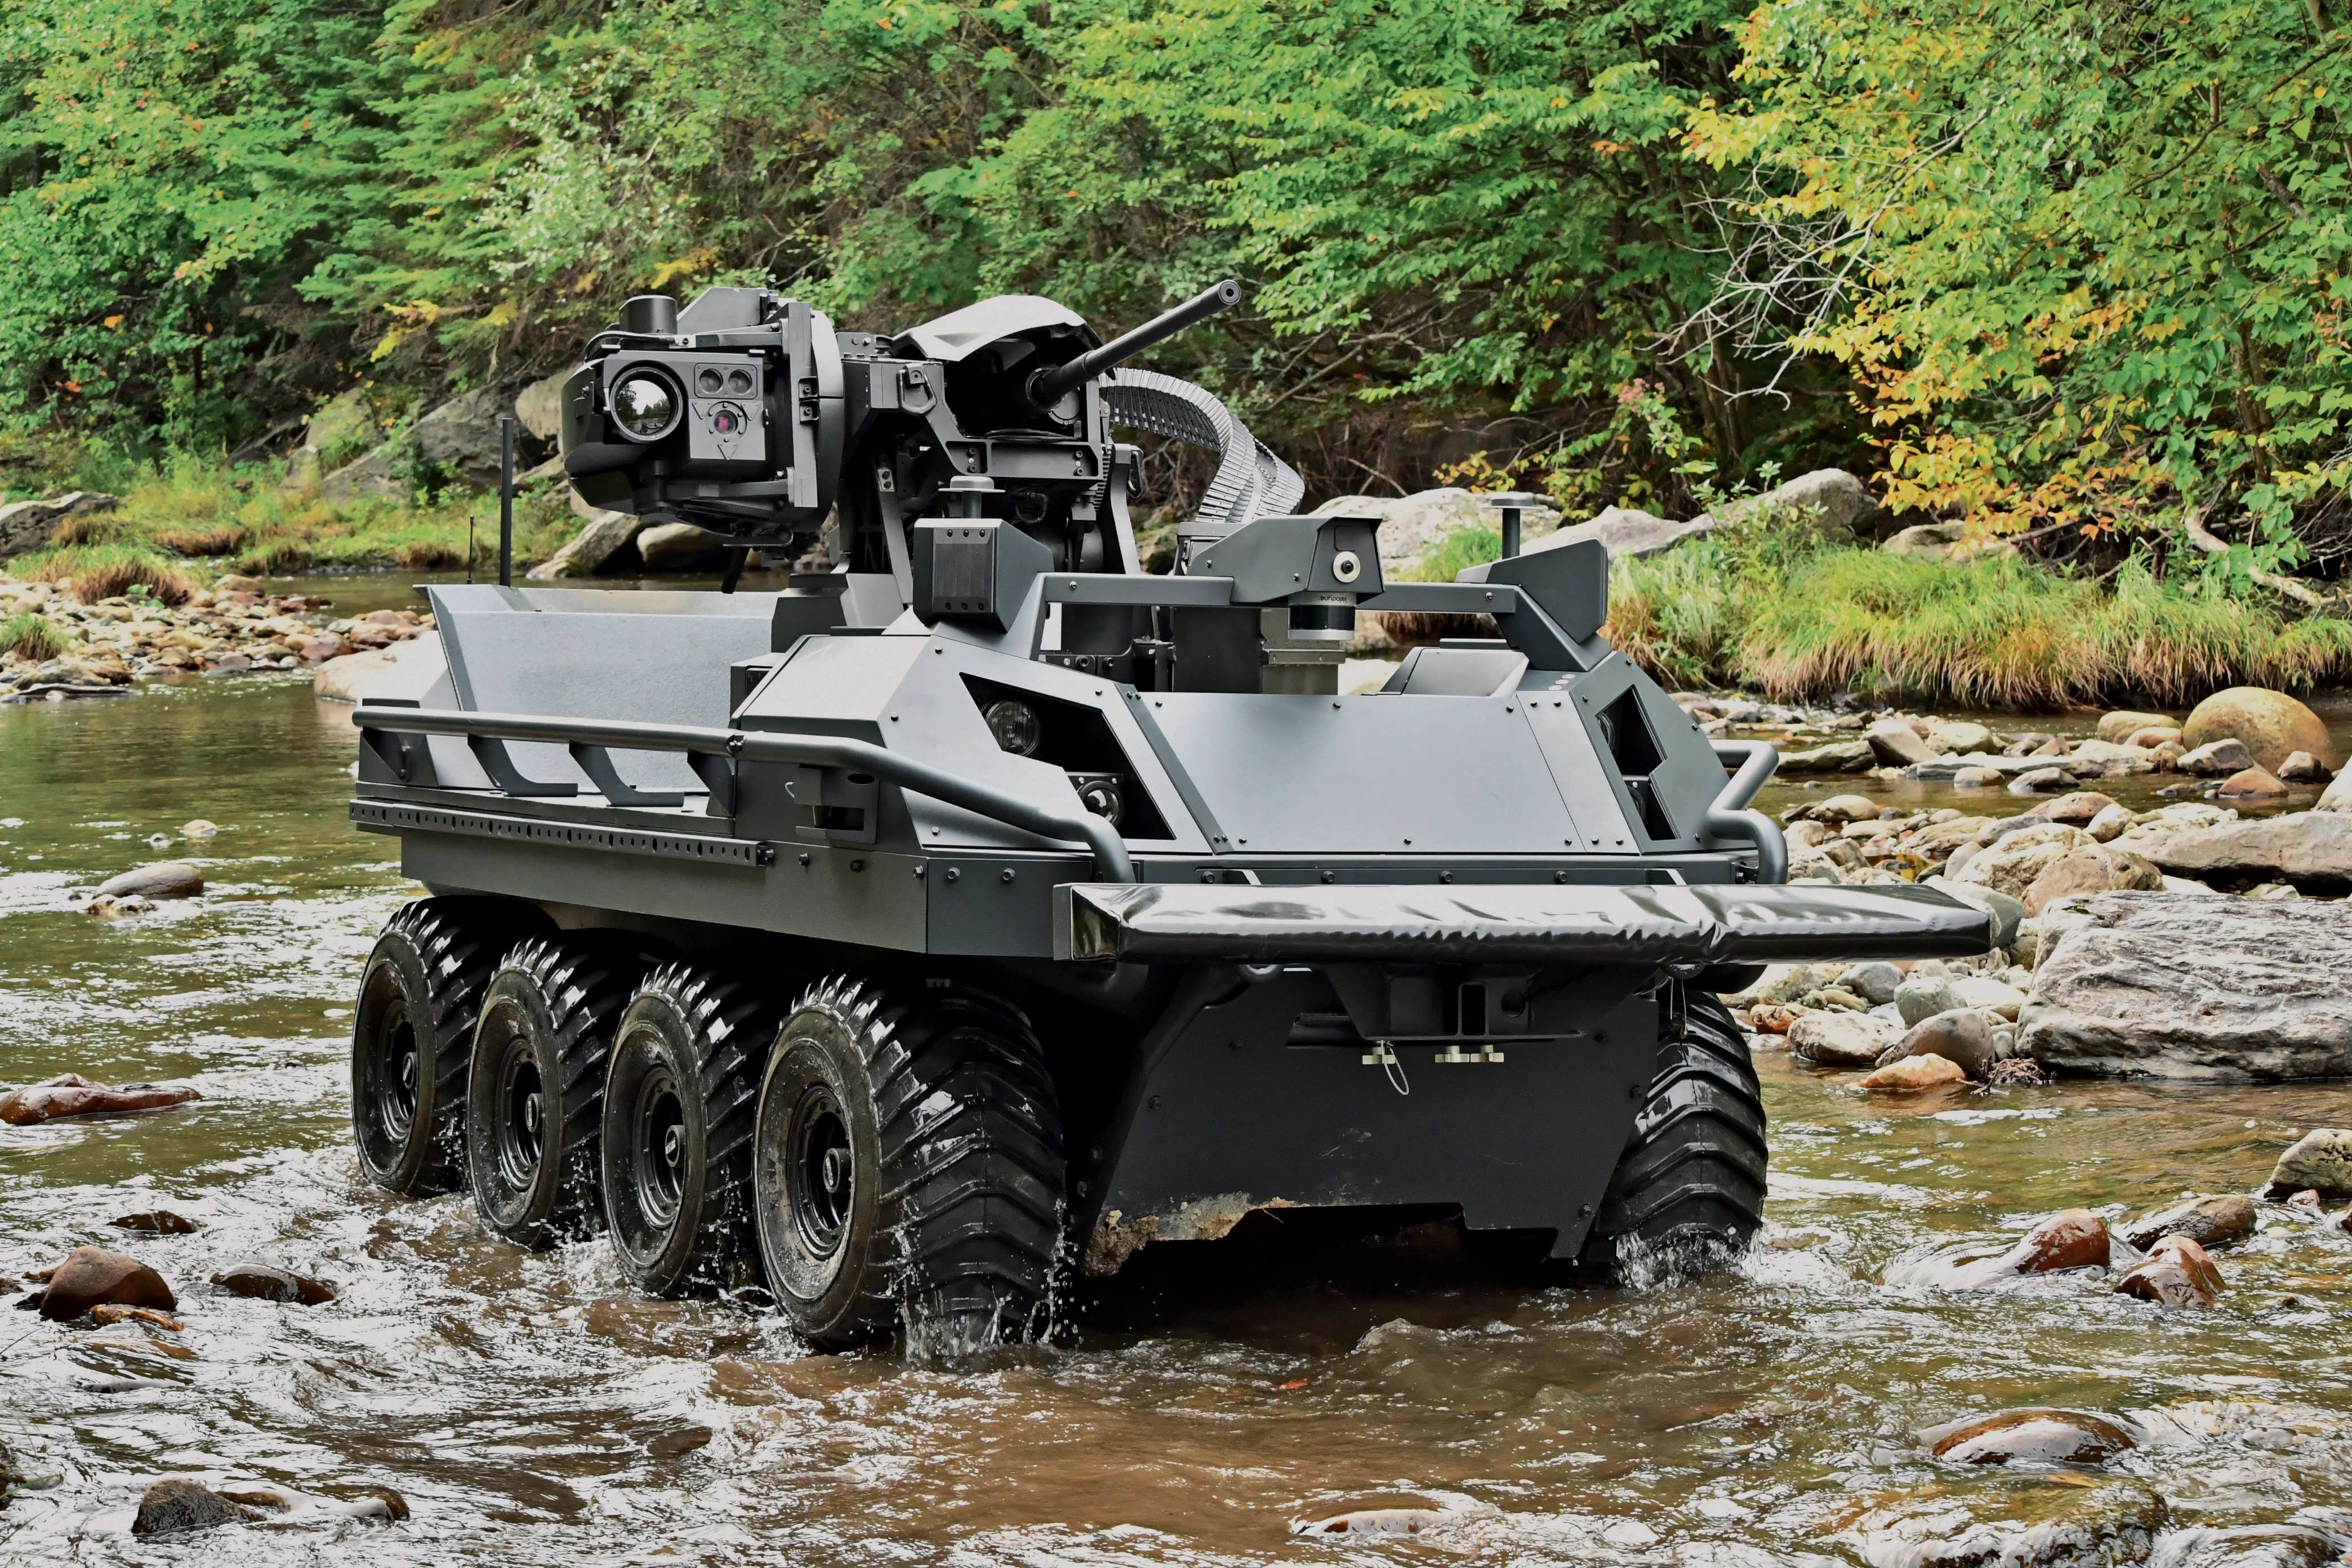 American Rheinmetall Vehicles Conducts Live-Fire Demo and Continues to Deliver AUGVs to the U.S. Marine Corps for Testing, Training and Deployment 48